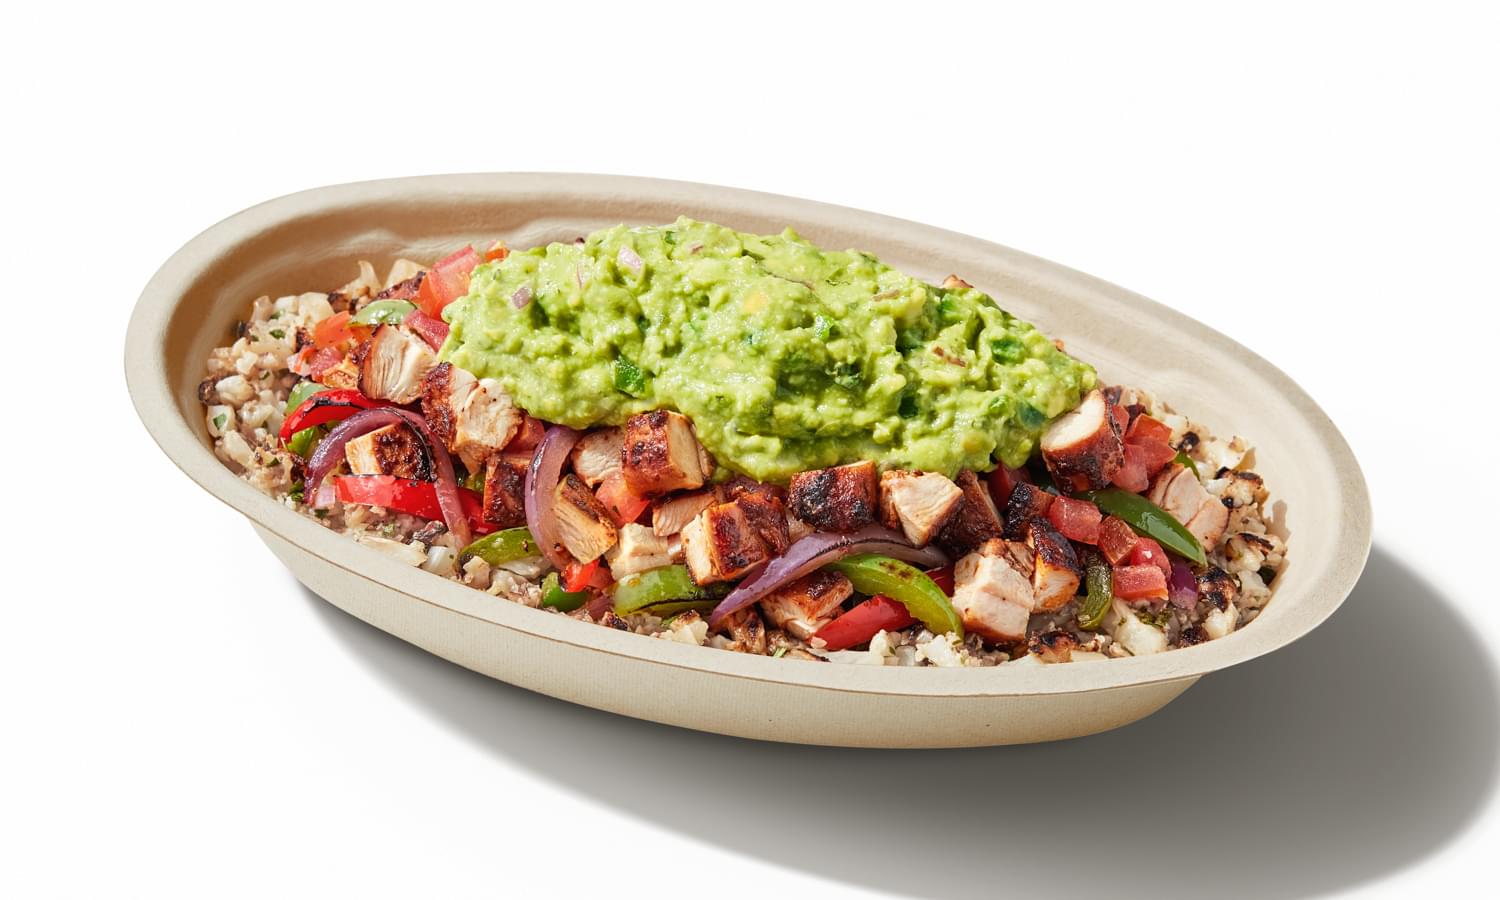 Chipotle Whole30 Bowl Nutrition Facts